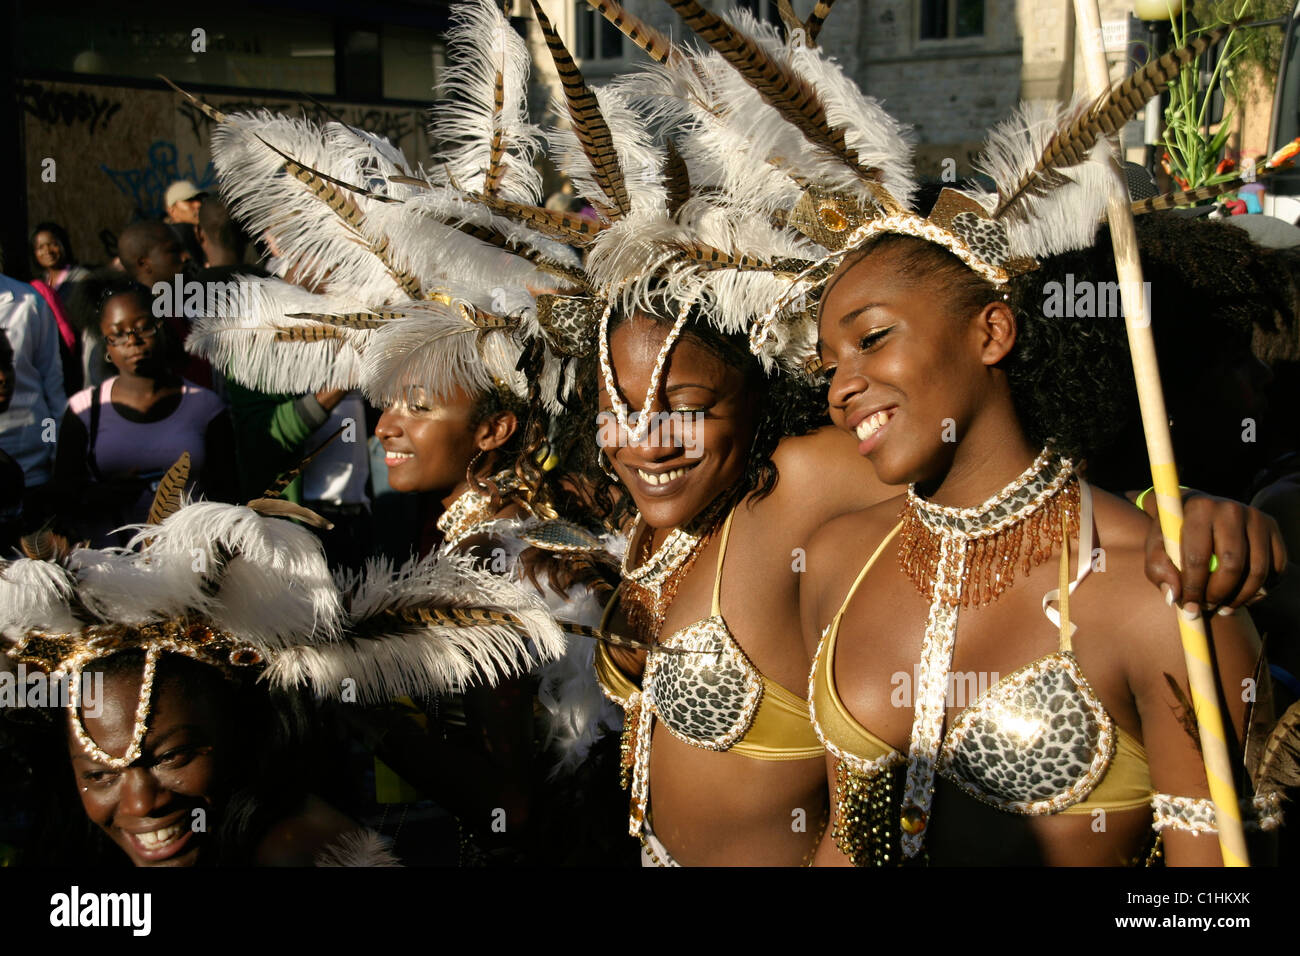 Young women in bikini costumes at Notting Hill Festival Stock Photo